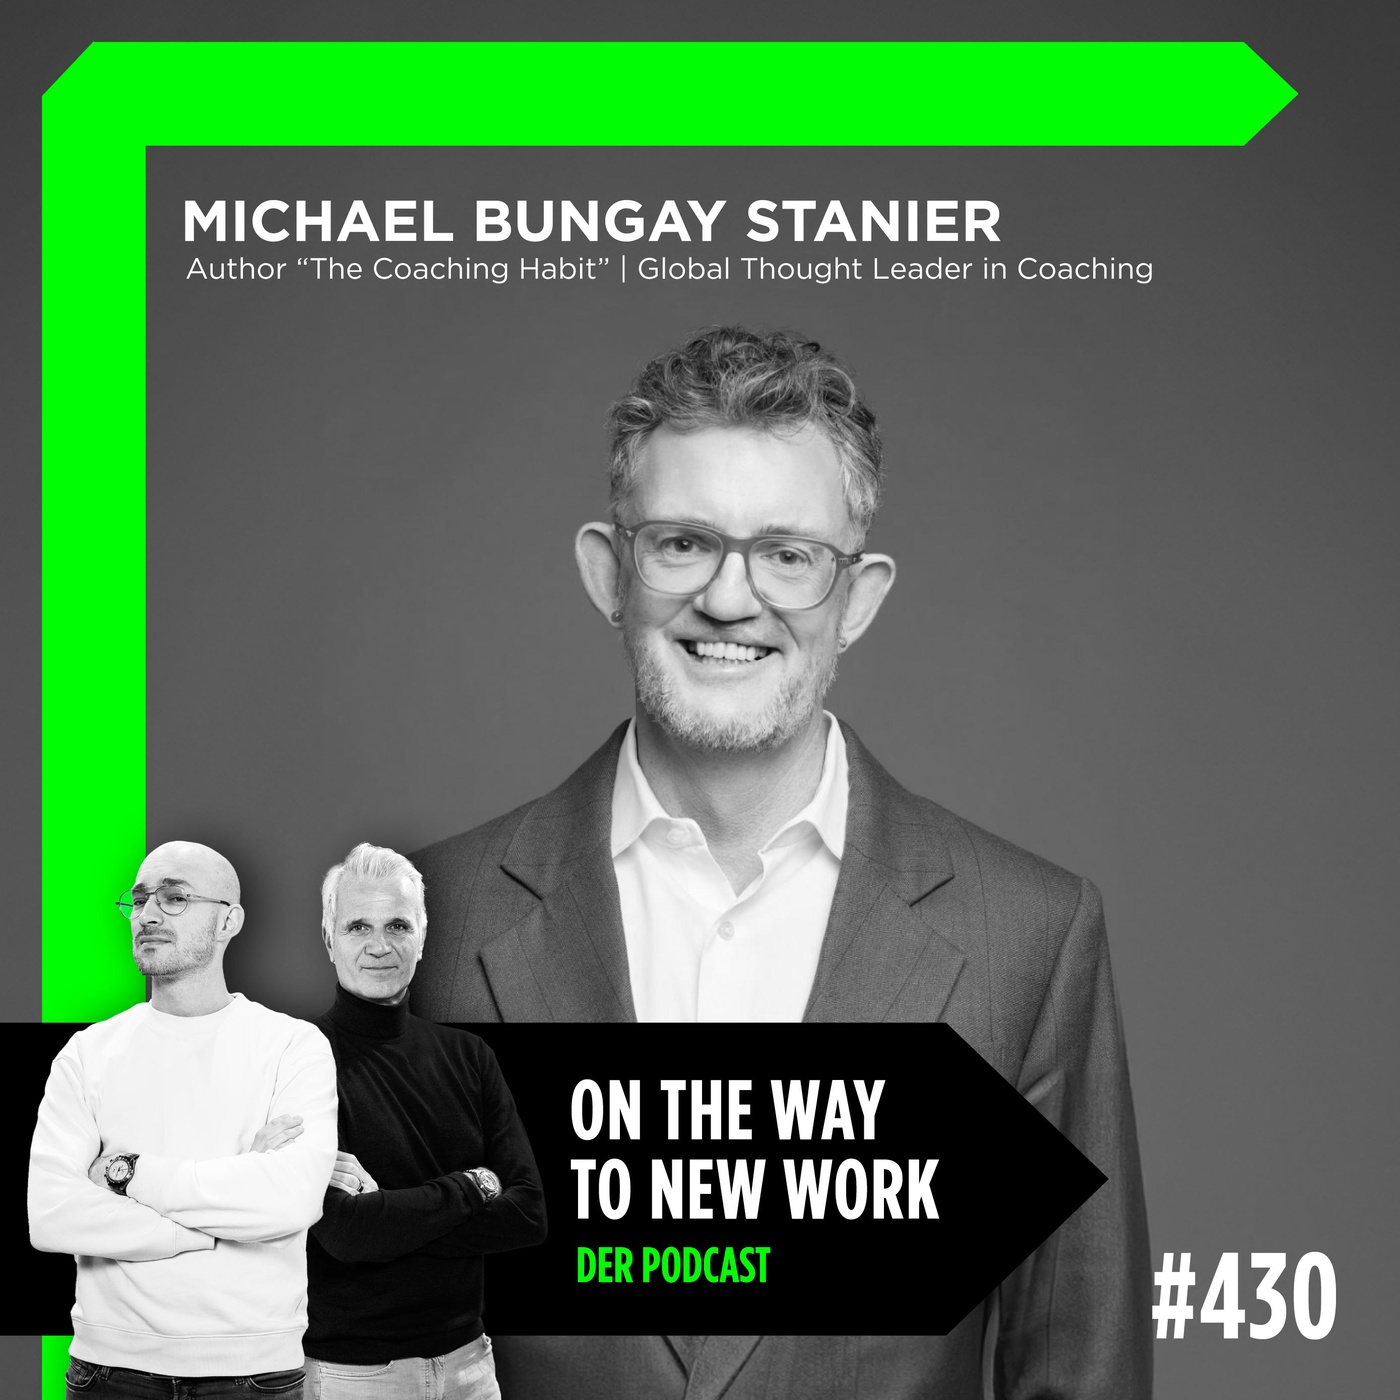 #430 Michael Bungay Stanier | Author “The Coaching Habit” | Global Thought Leader in Coaching